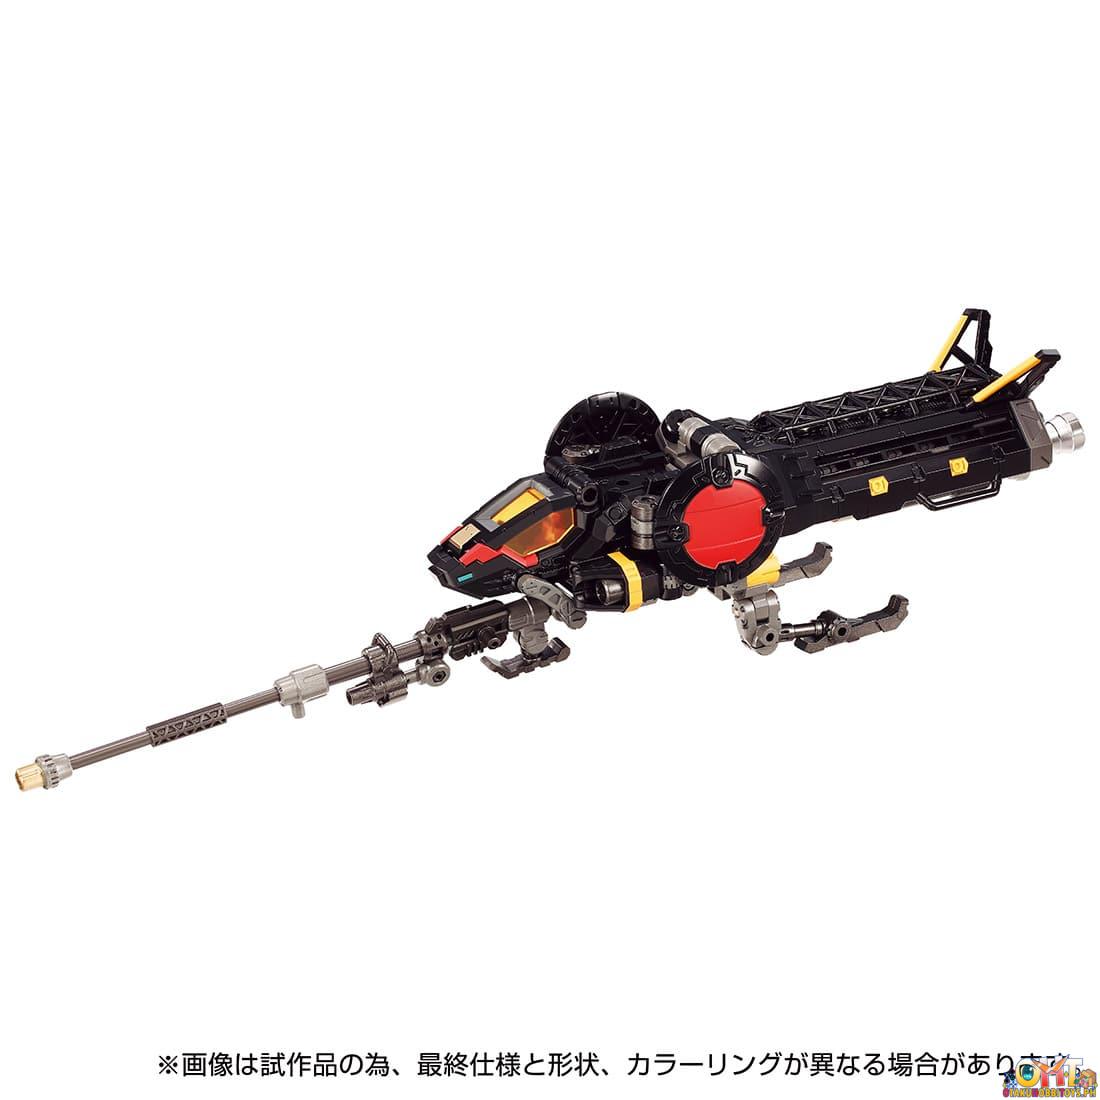 Diaclone TM-15 Tactical Mover Hawk Versaulter <ORBITHOPTER UNIT> Dark Version Takara Tomy Mall Exclusive